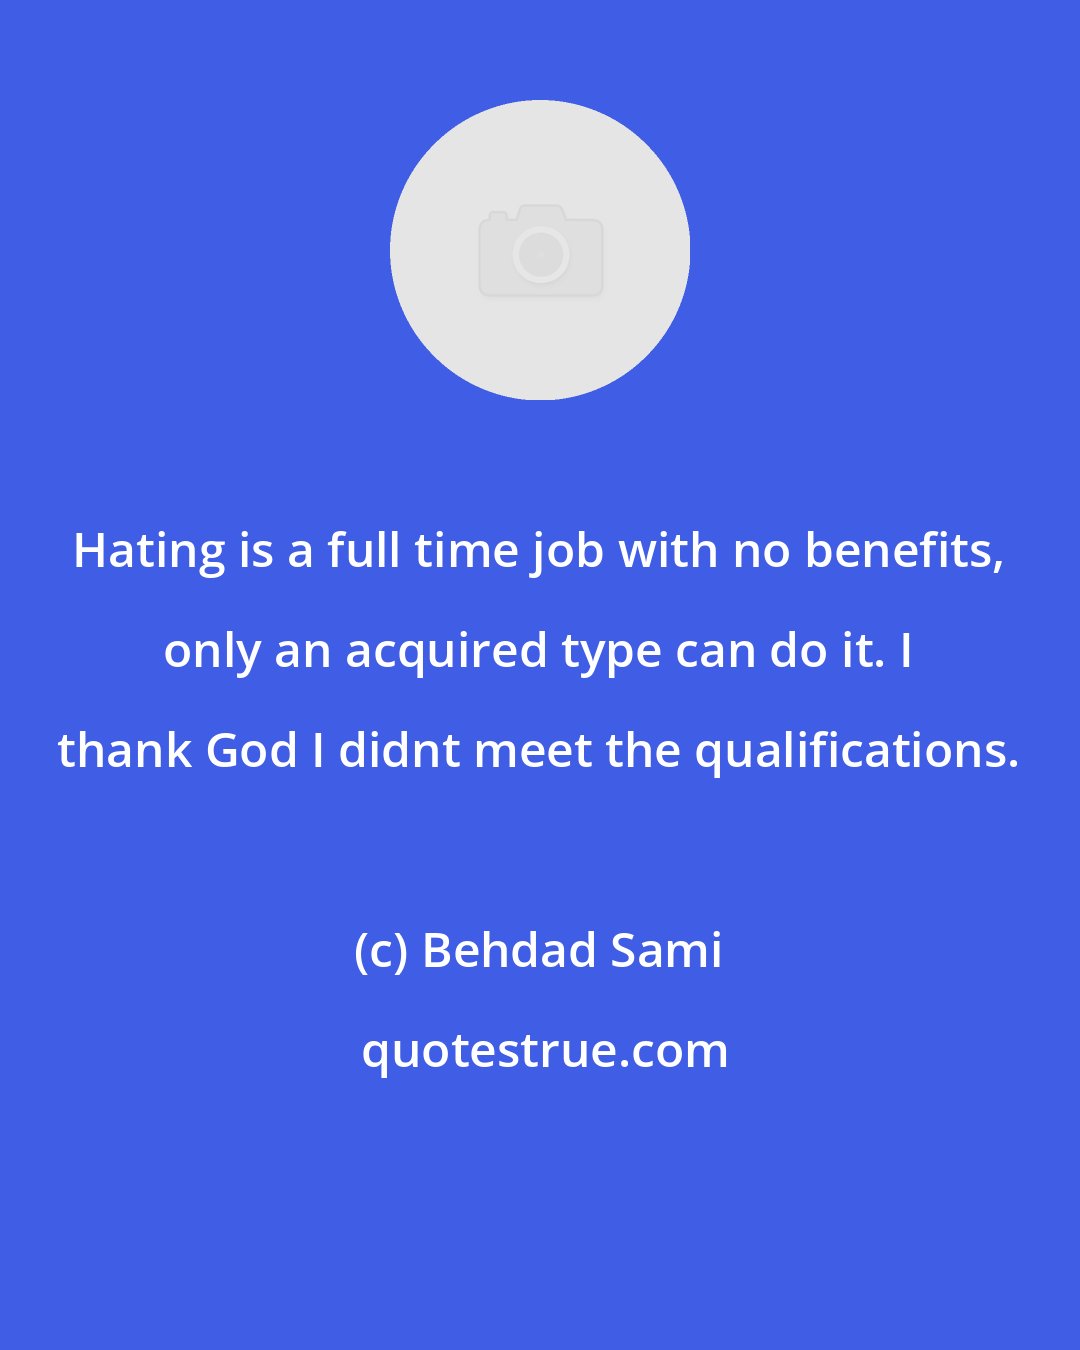 Behdad Sami: Hating is a full time job with no benefits, only an acquired type can do it. I thank God I didnt meet the qualifications.